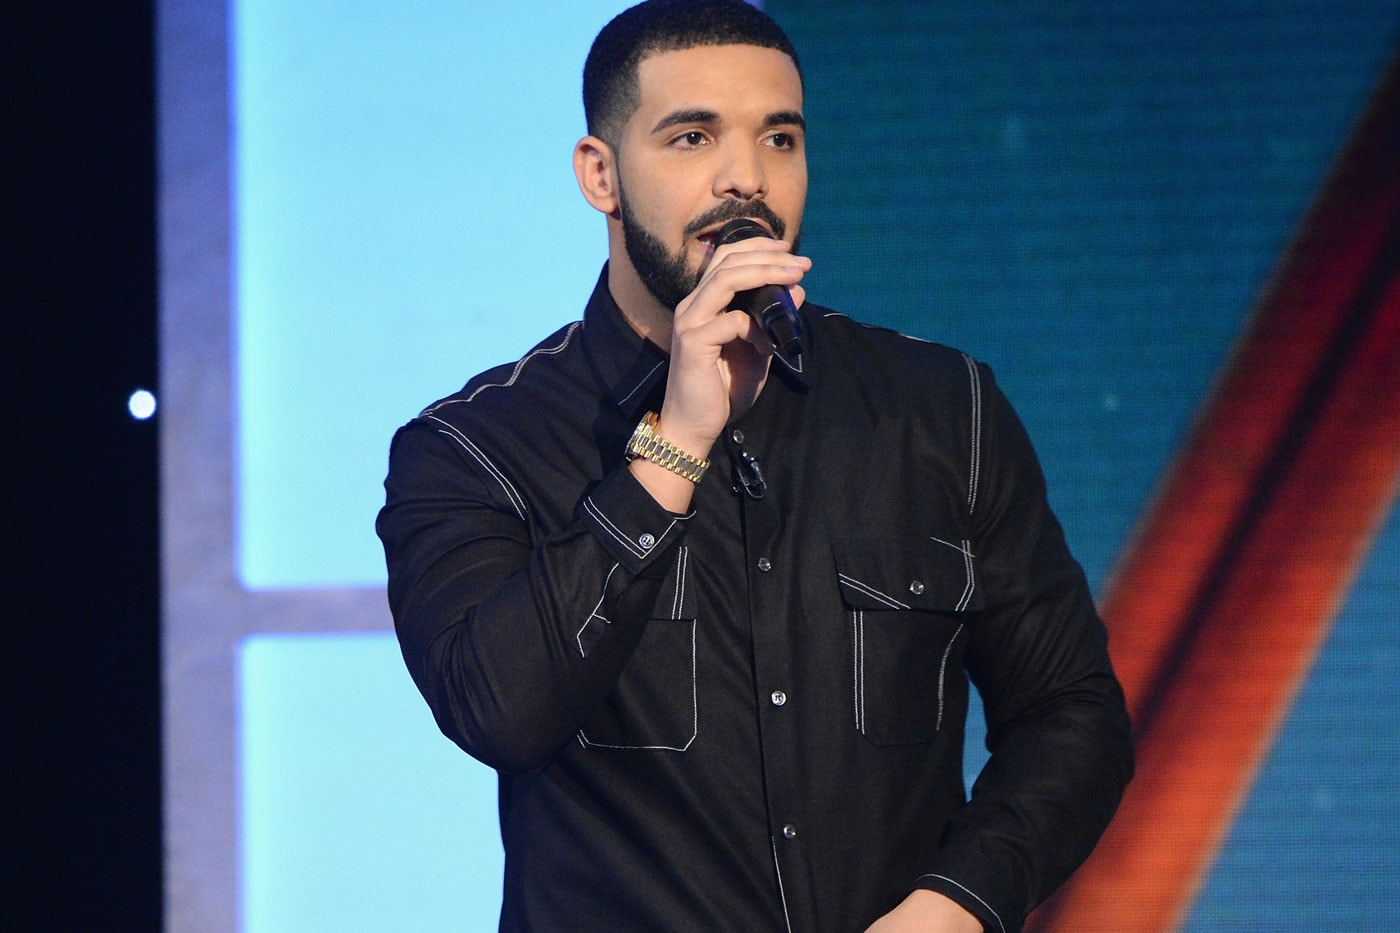 Drake Brings out Meek Mill in Philadelphia to Perform "Dreams and Nightmares" concert beef diss Aubrey and the Three Amigos